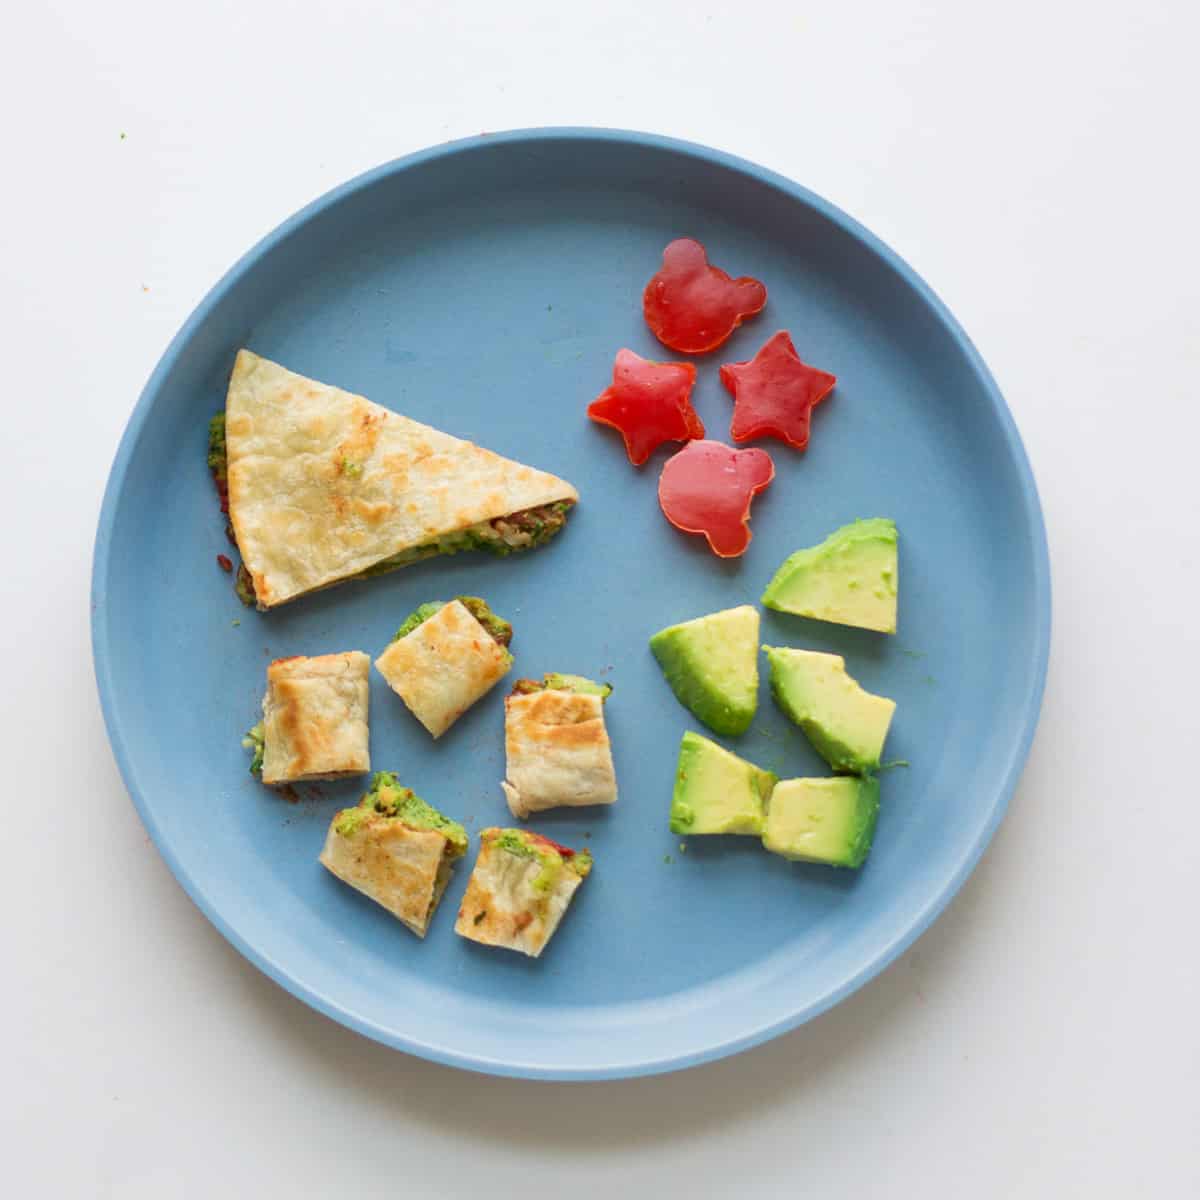 Sliced and bite sized quesadilla with avocado and cute shape bell peppers.